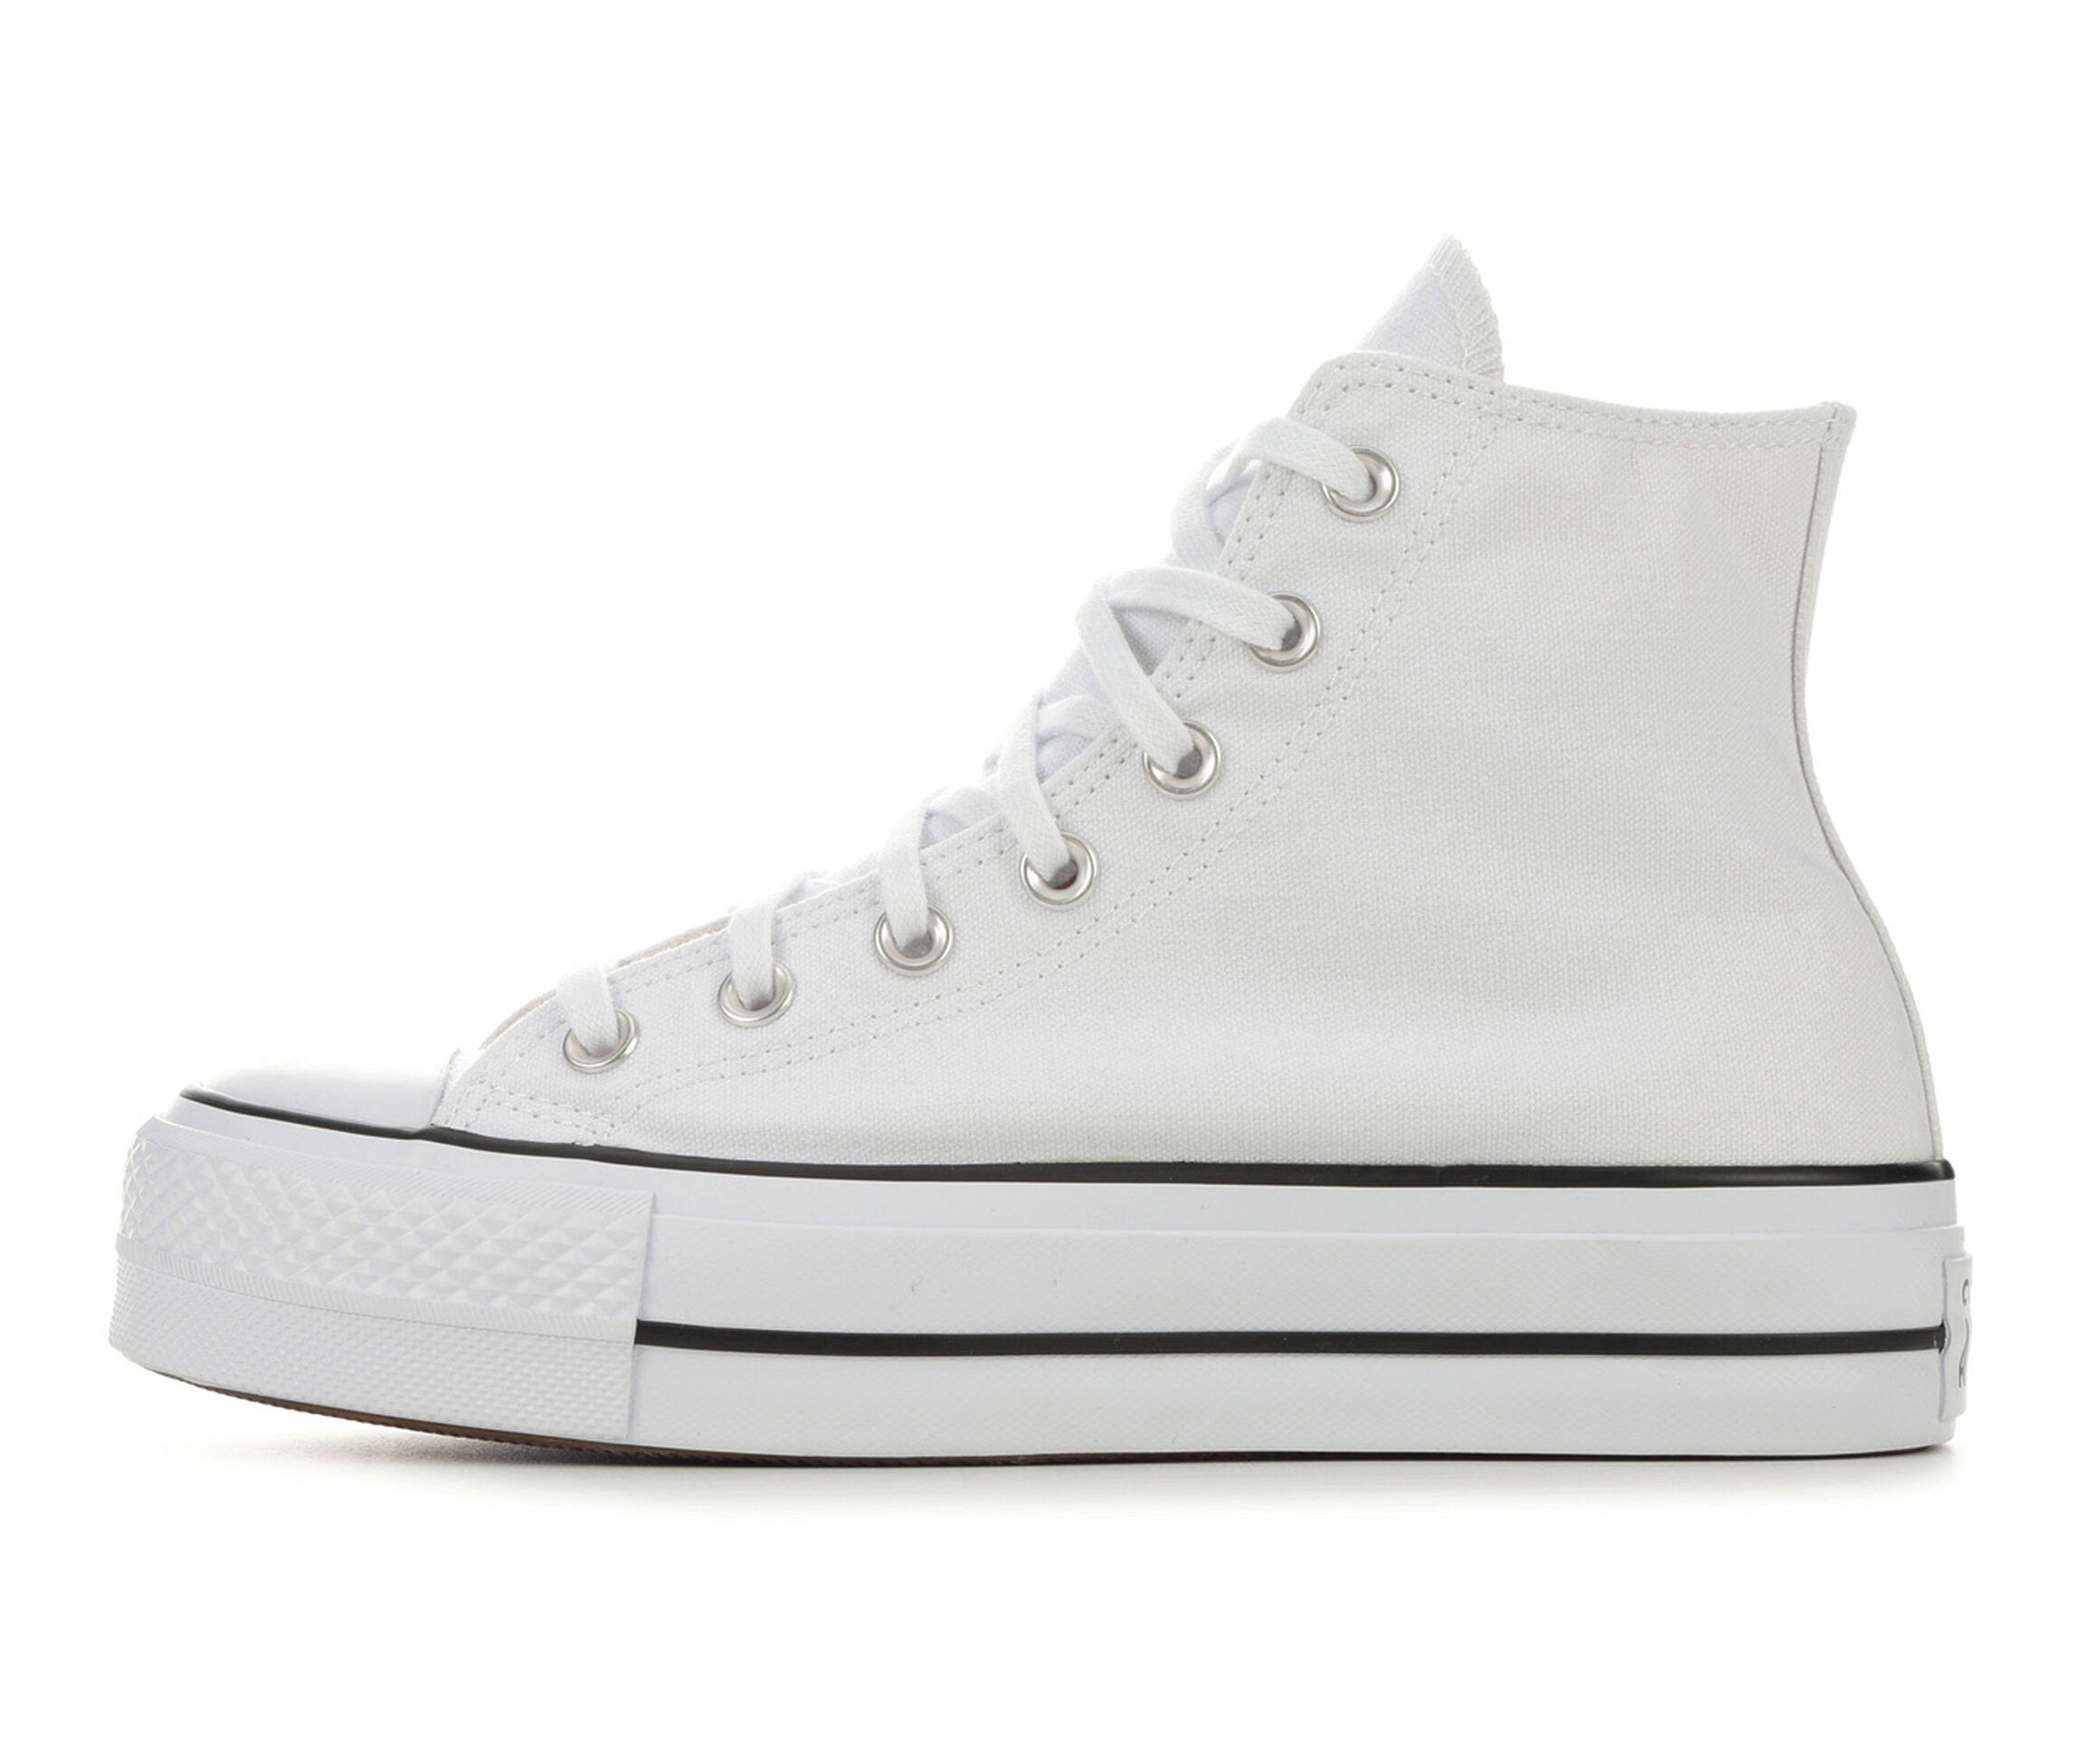 Shoe Carnival Converse Offers, Save 56% 